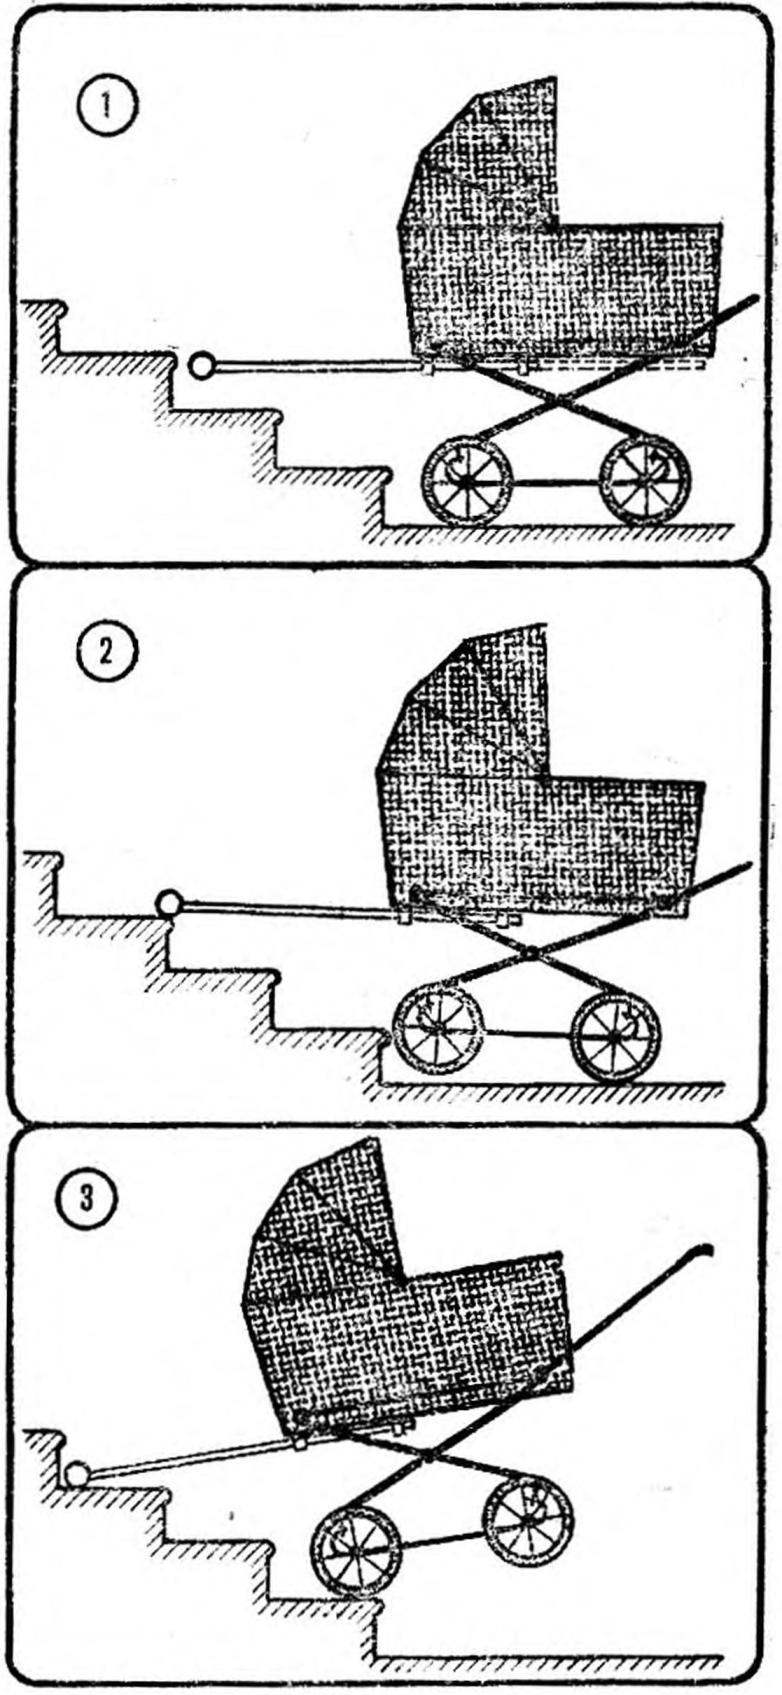 Fig. 2. The scheme of movement on the stairs